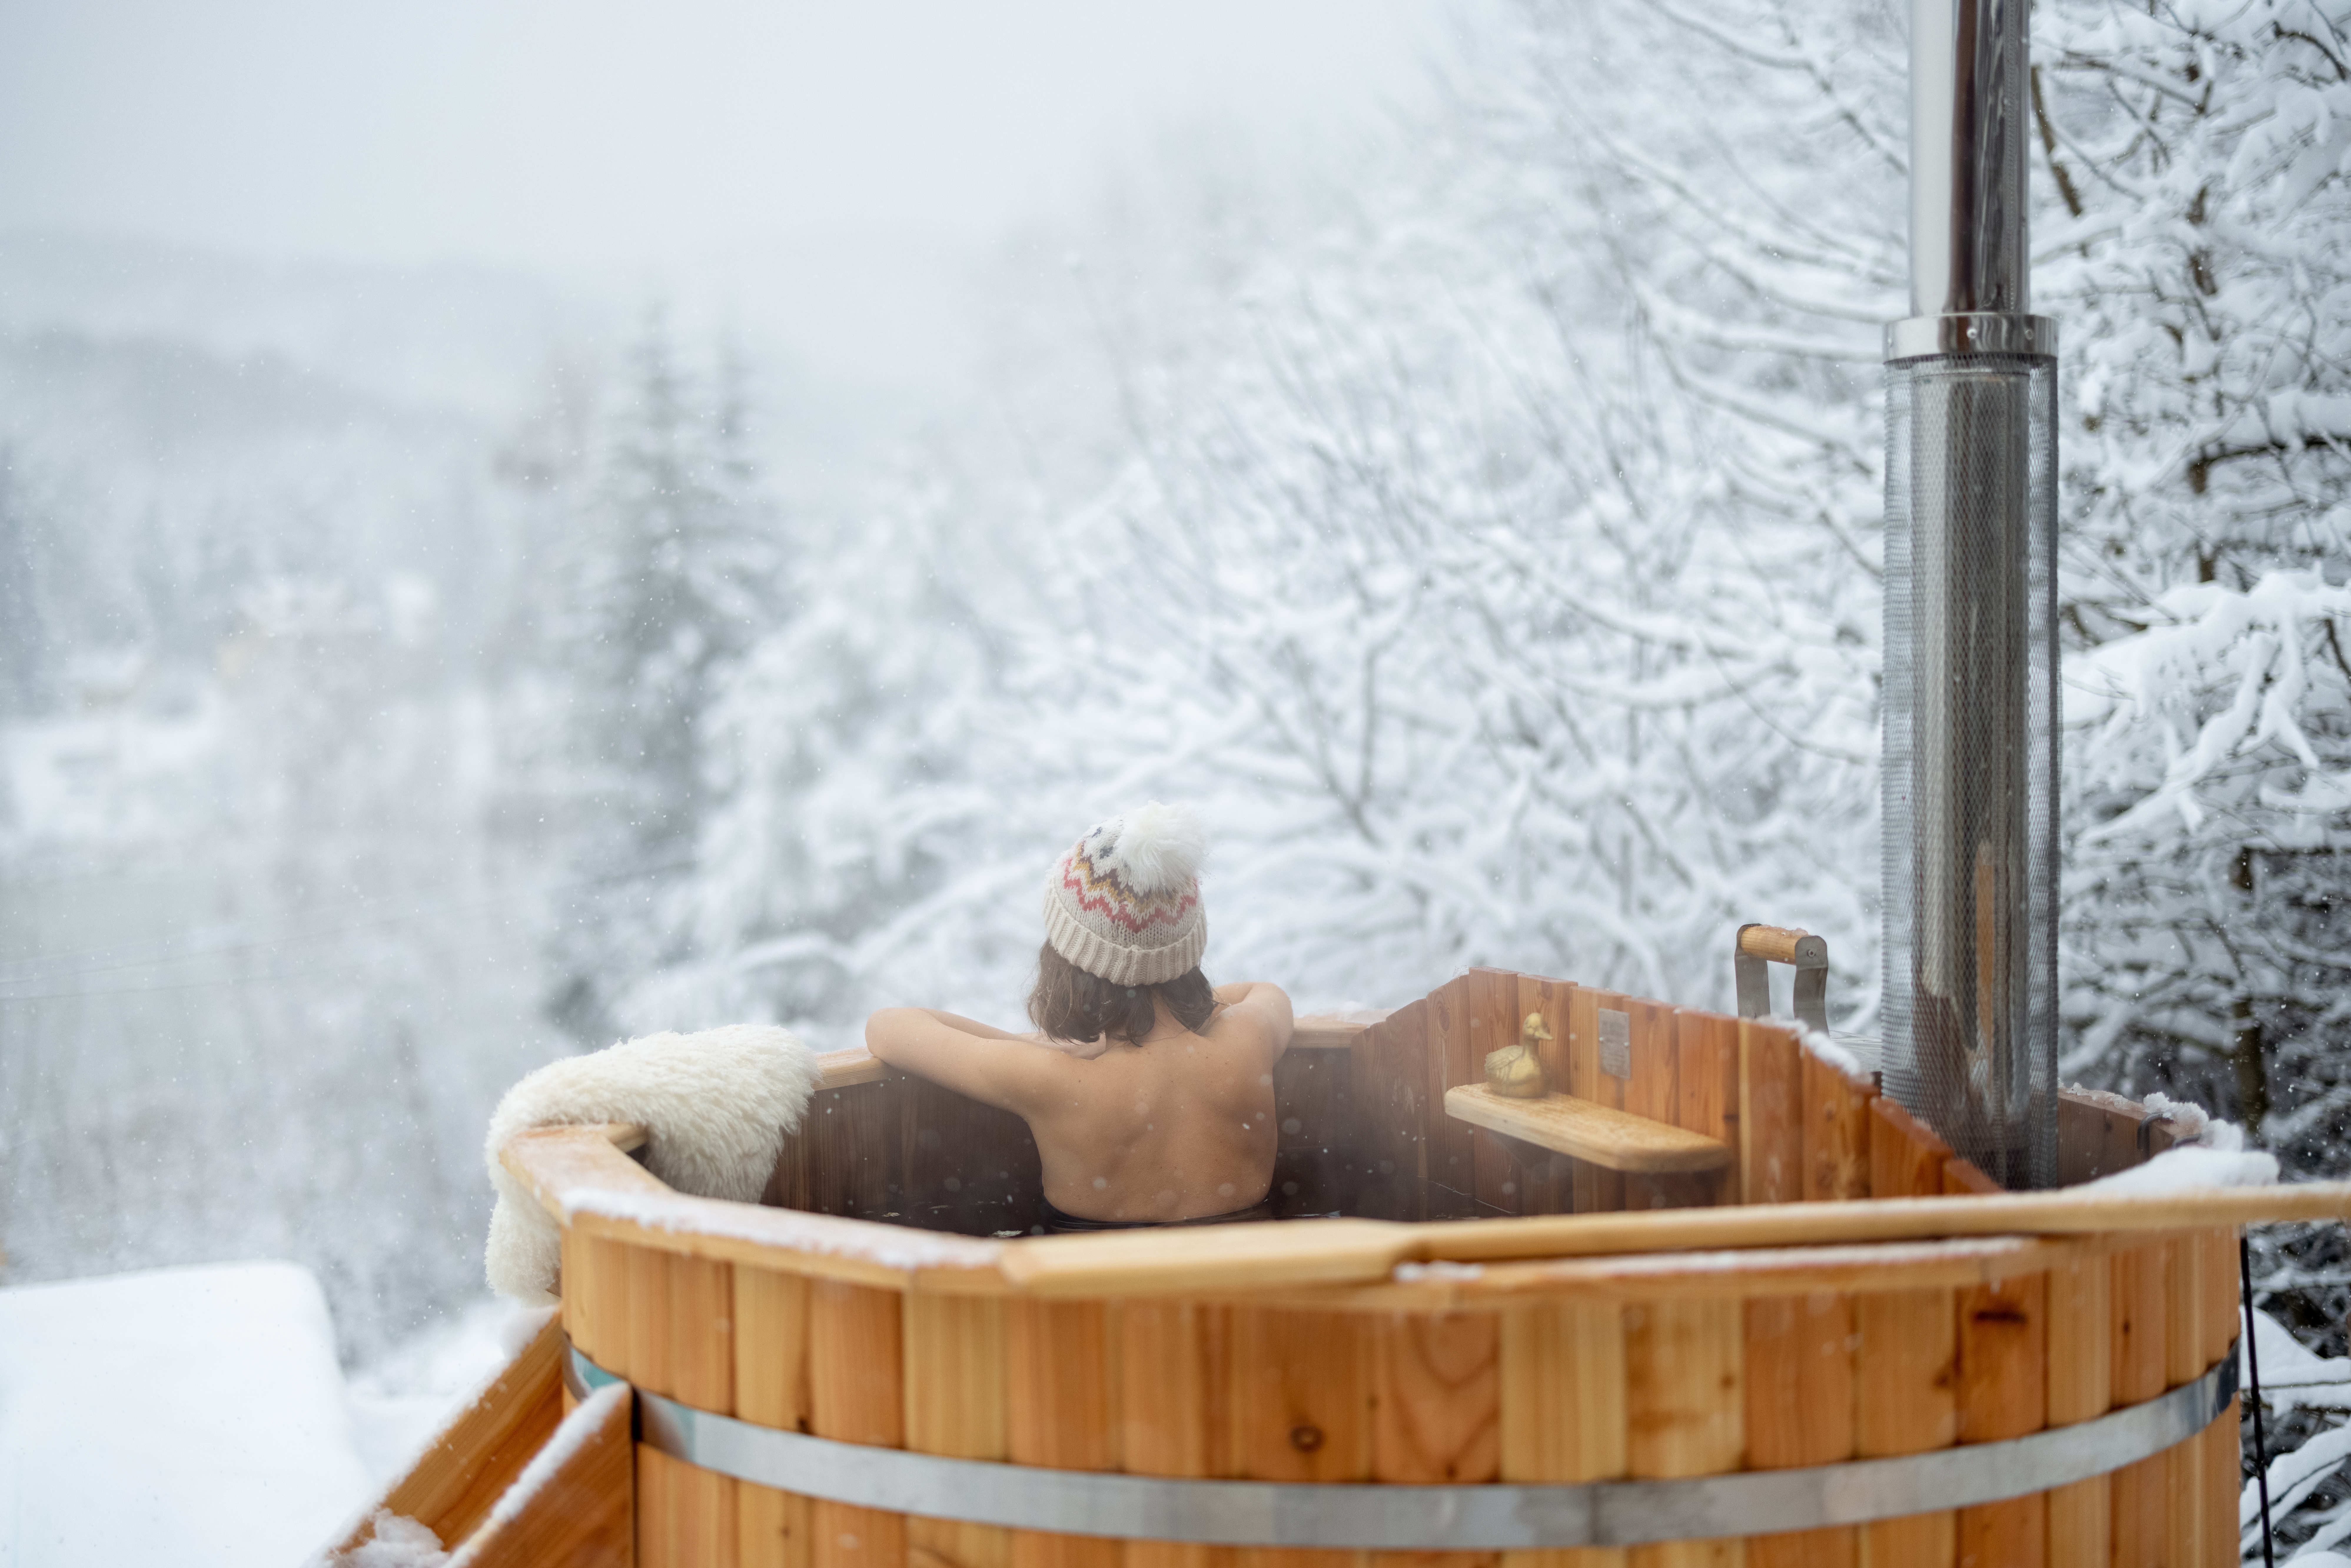 woman relaxing in hot bath at snowy mountains